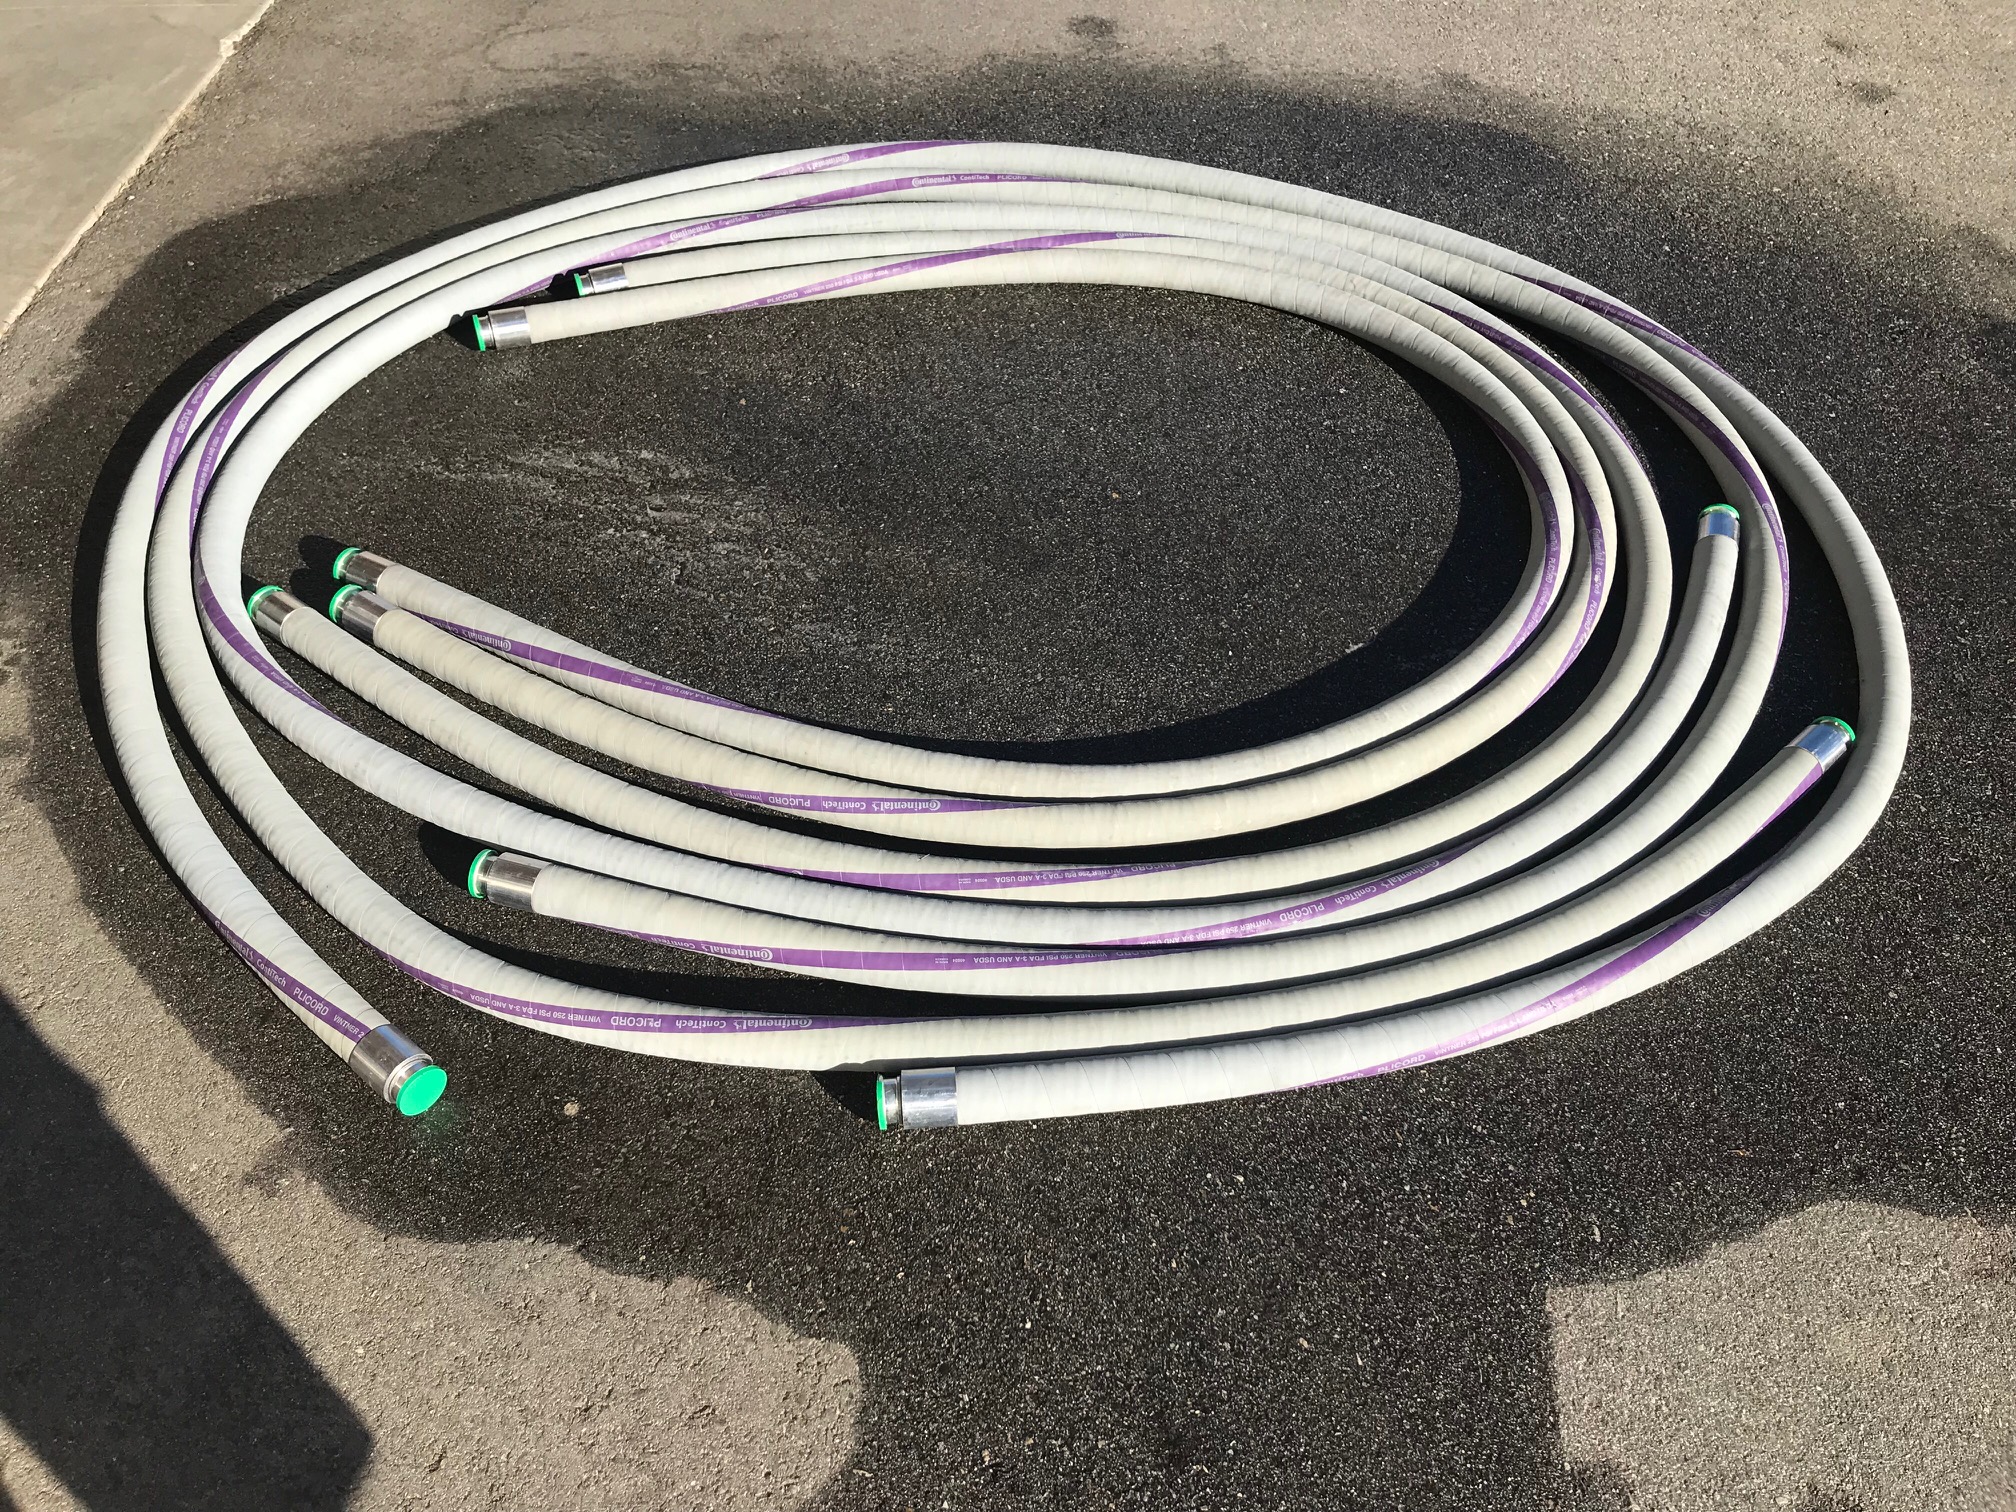 5 hoses total